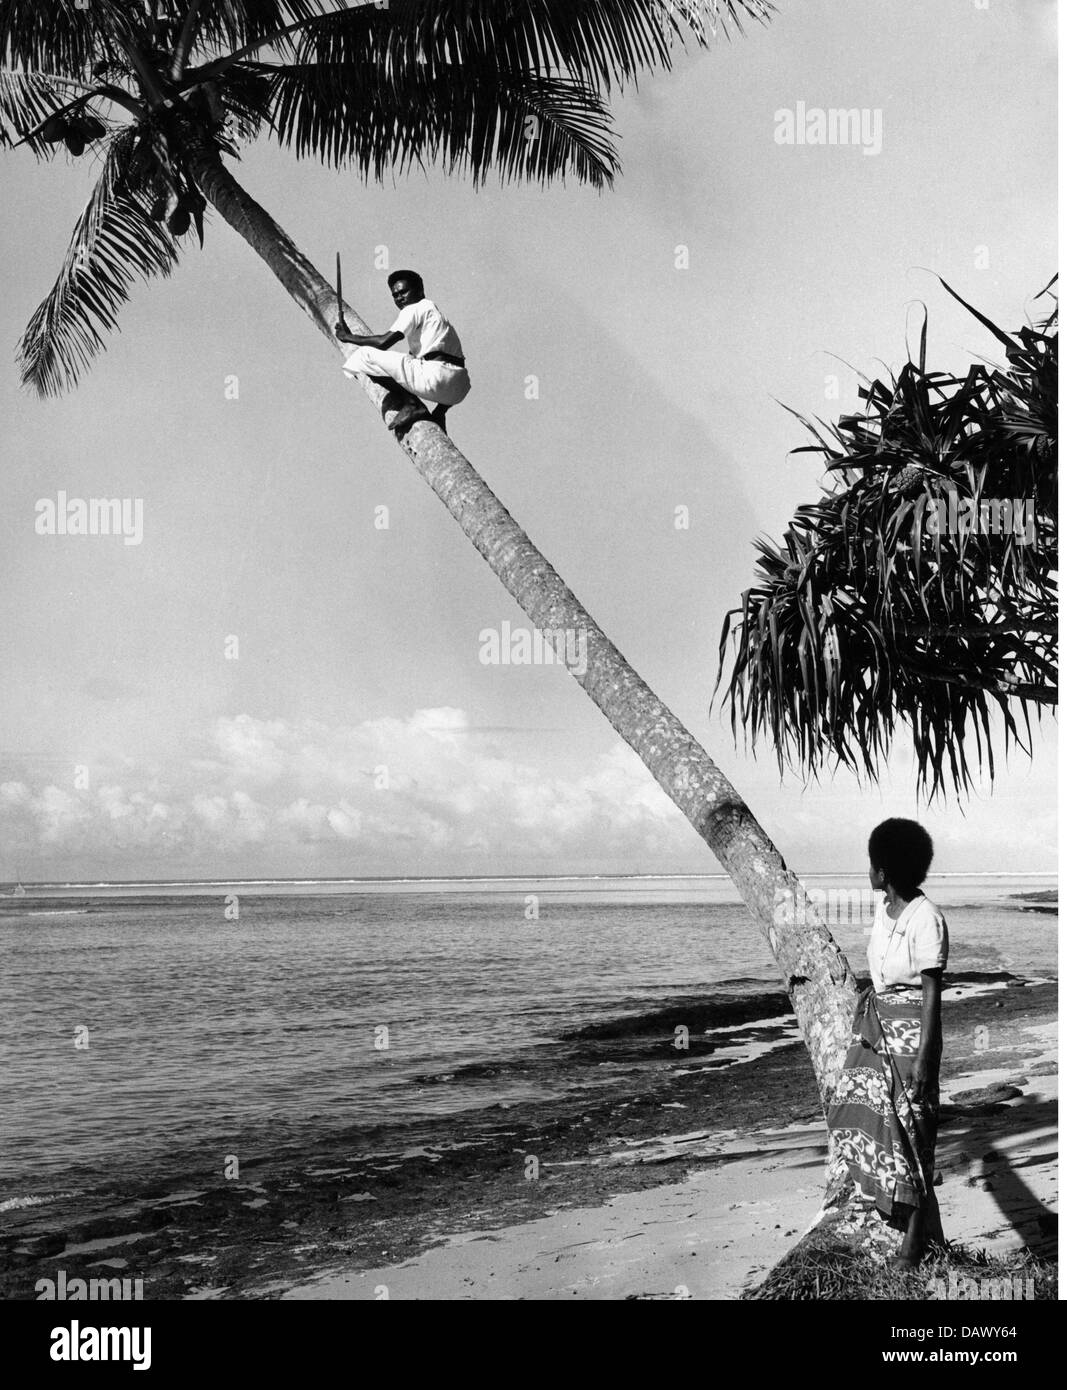 Fiji people Black and White Stock Photos & Images - Alamy